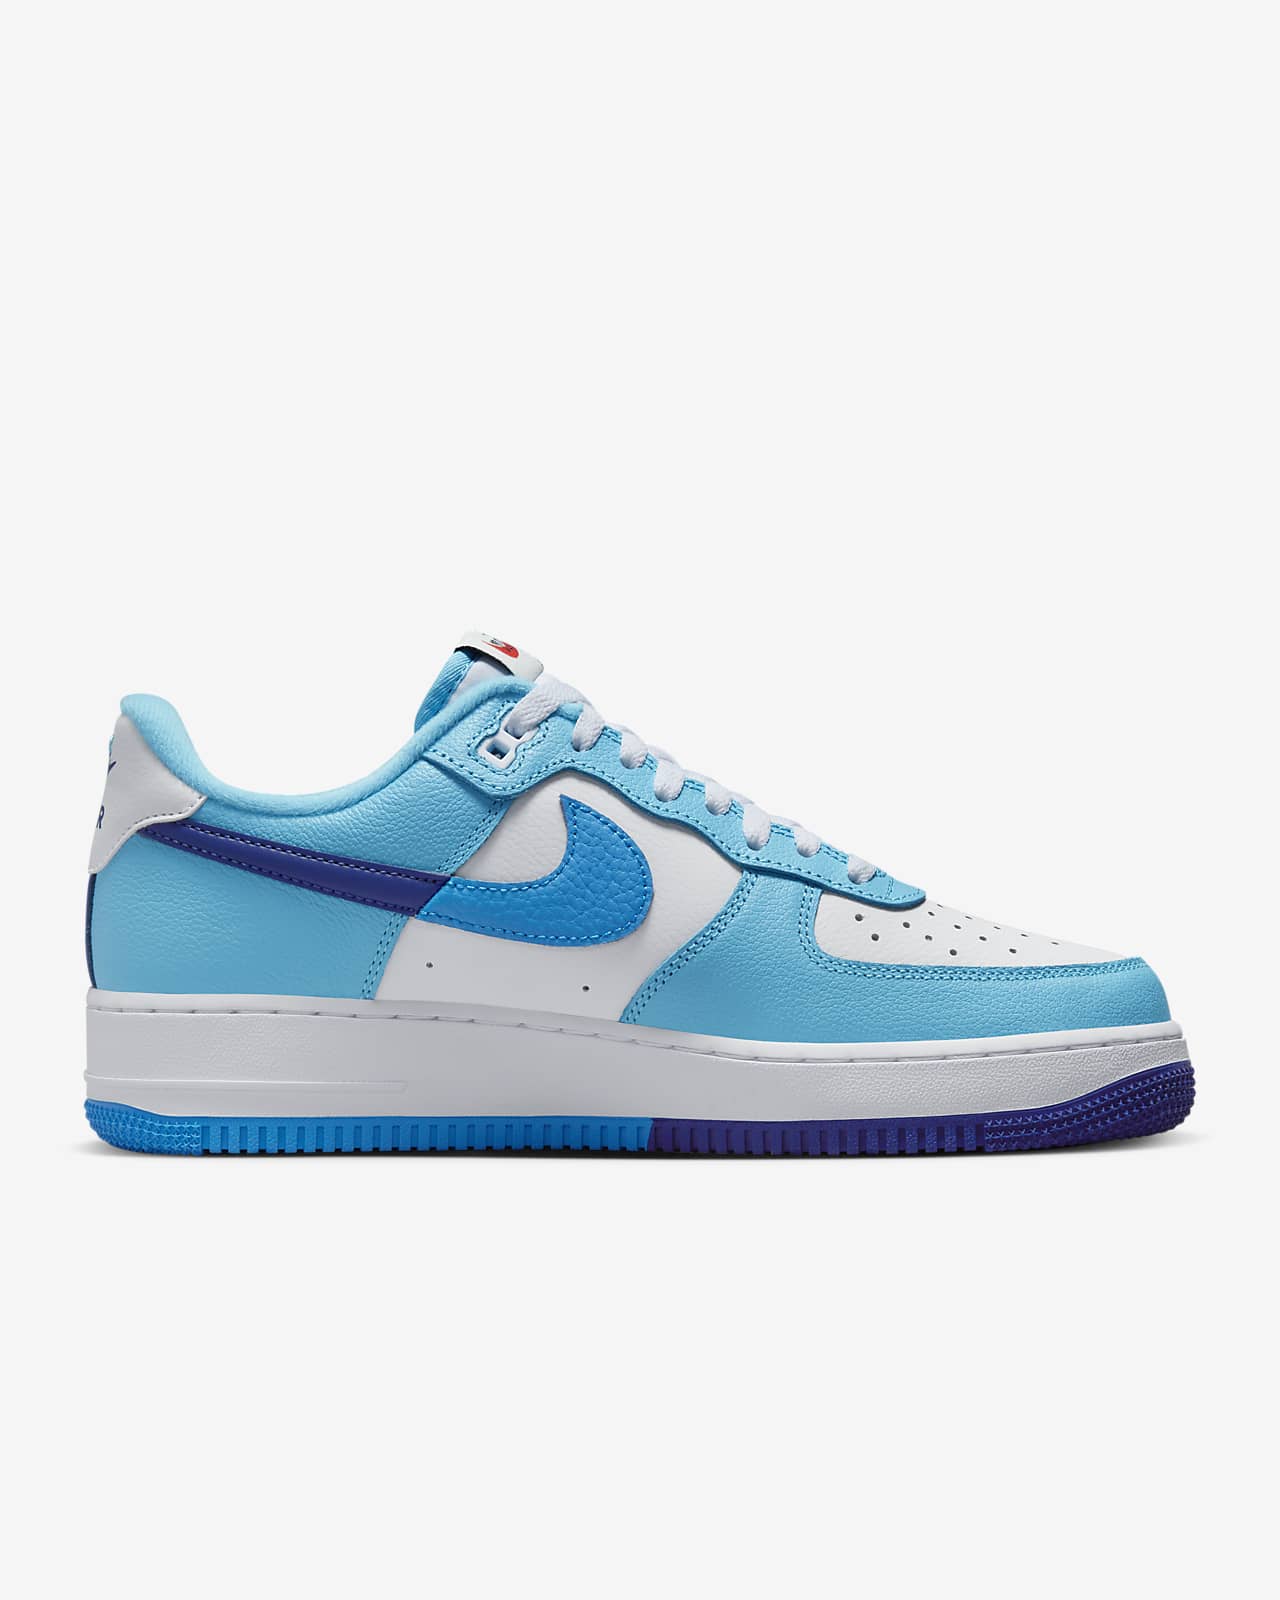 Nike Air Force 1 '07 LV8 1 Men's Shoes.